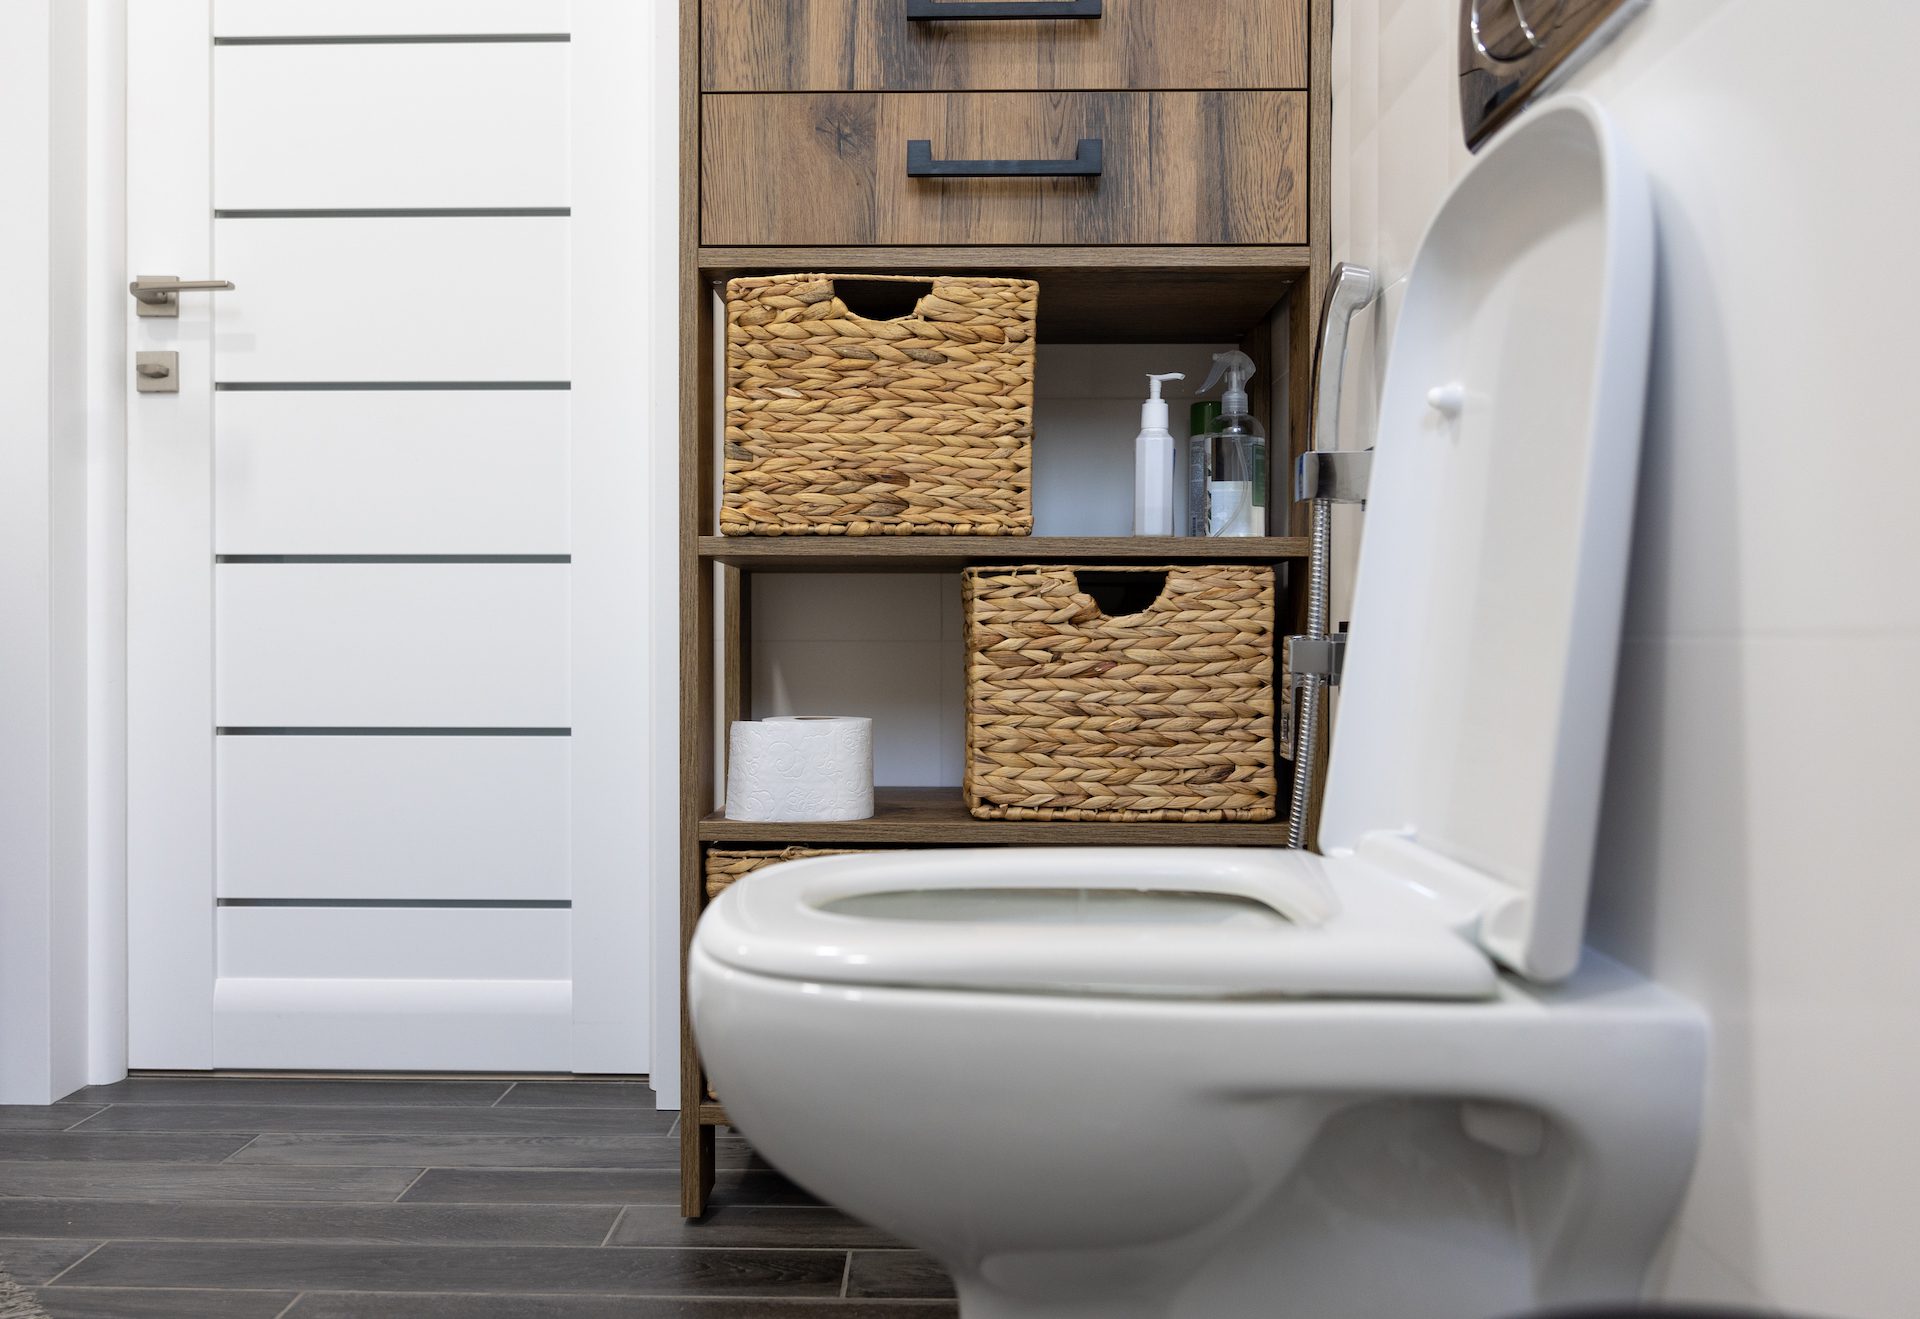 What To Do When Your Toilet Won’t Flush, & Other Issues